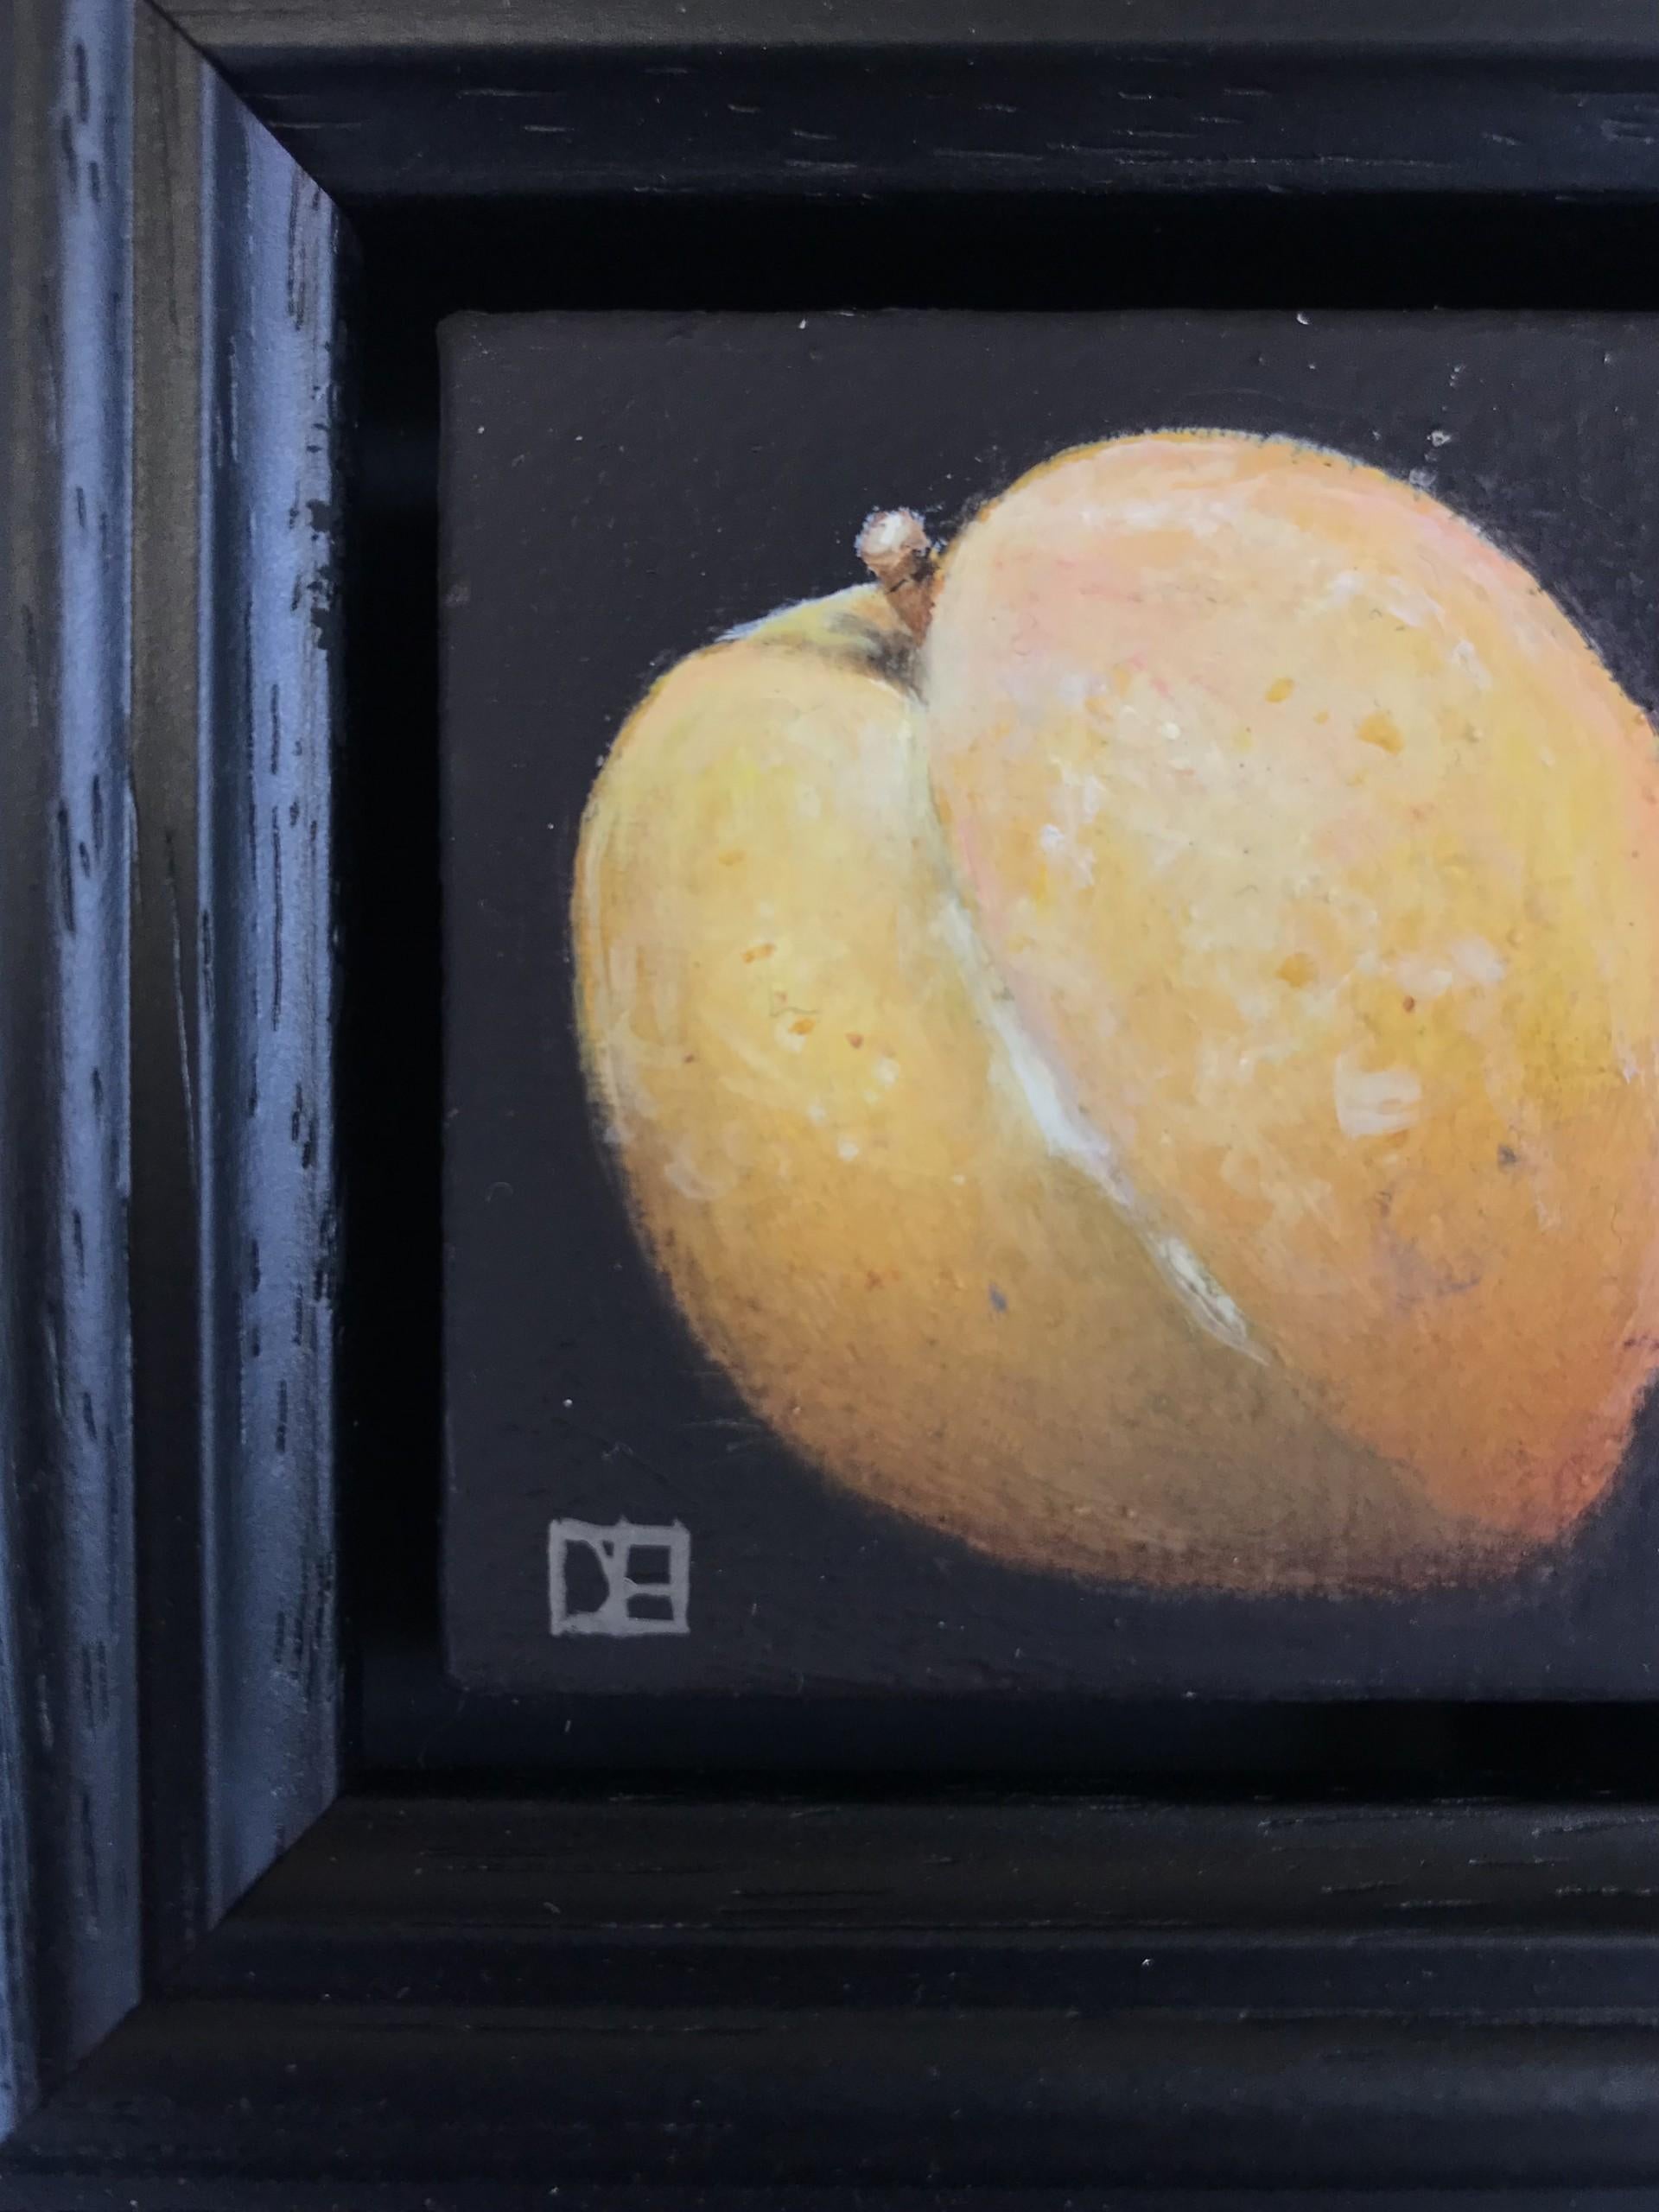 Pocket Yellow Quince by Dani Humberstone [2022]
original and hand signed by the artist 

Oil paint on canvas

Image size: H:5 cm x W:5 cm

Complete Size of Unframed Work: H:5 cm x W:5 cm x D:3cm

Frame Size: H:16 cm x W:16 cm x D:3.5cm

Sold